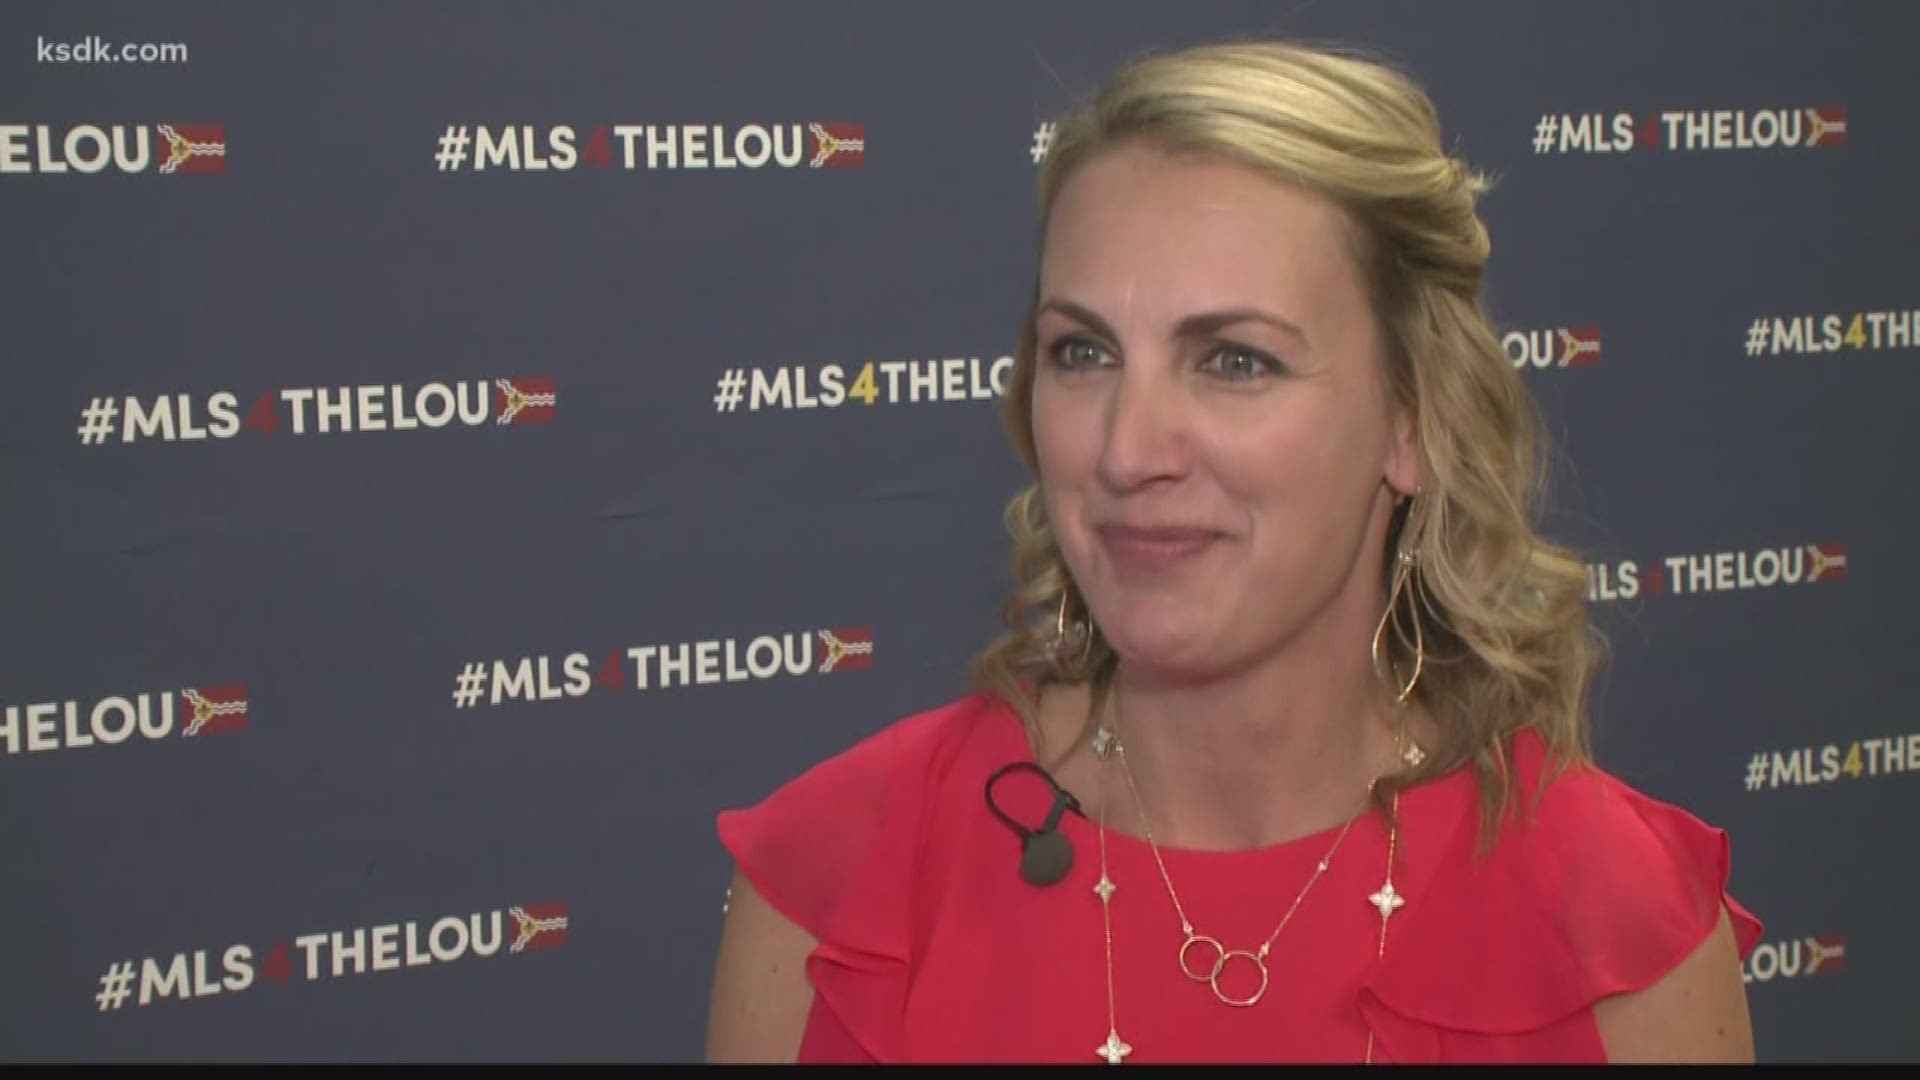 Carolyn Kindle Betz thinks about bringing Major League Soccer to St. Louis 24 hours a day, seven days a week. And she isn't slowing down until she makes it happen.